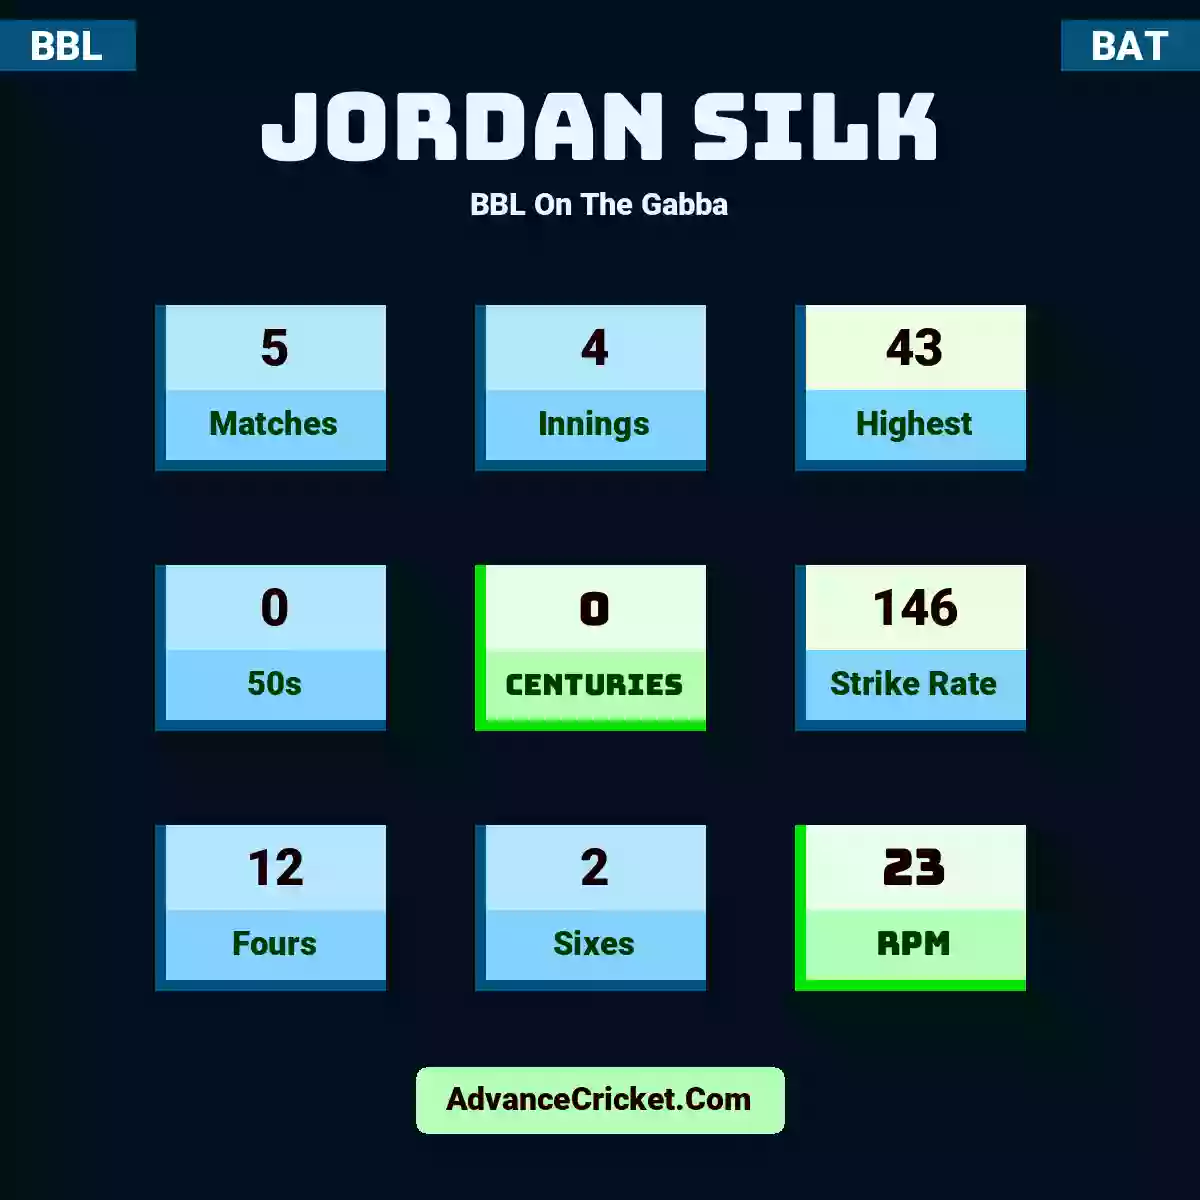 Jordan Silk BBL  On The Gabba, Jordan Silk played 5 matches, scored 43 runs as highest, 0 half-centuries, and 0 centuries, with a strike rate of 146. J.Silk hit 12 fours and 2 sixes, with an RPM of 23.